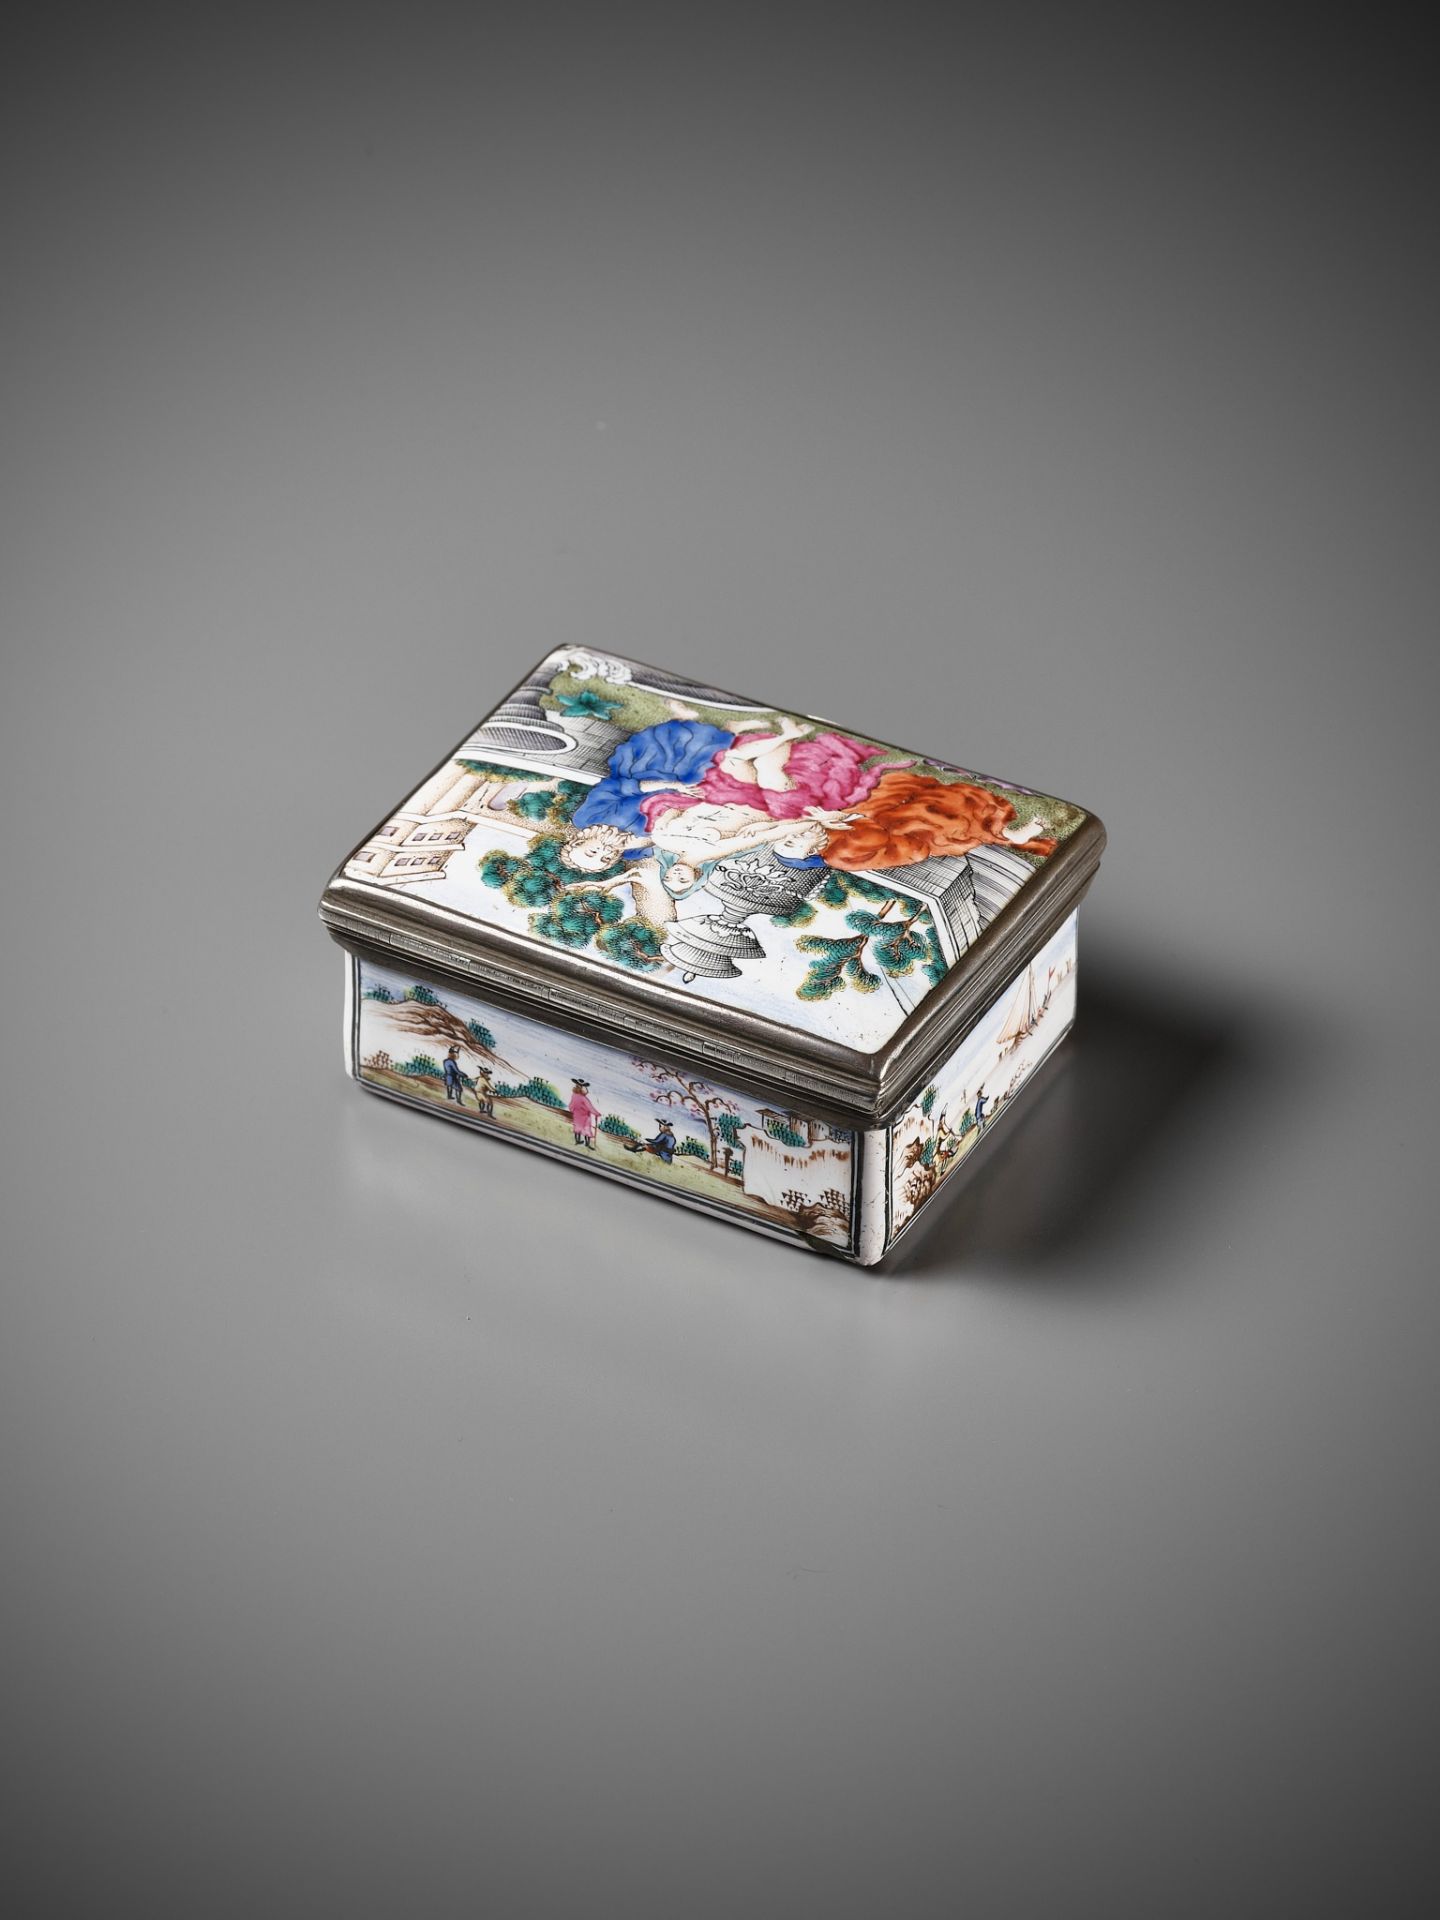 A CANTON ENAMEL 'EUROPEAN SUBJECT' BOX AND COVER DEPICTING SUSANNA AND THE ELDERS, QIANLONG PERIOD - Image 6 of 14